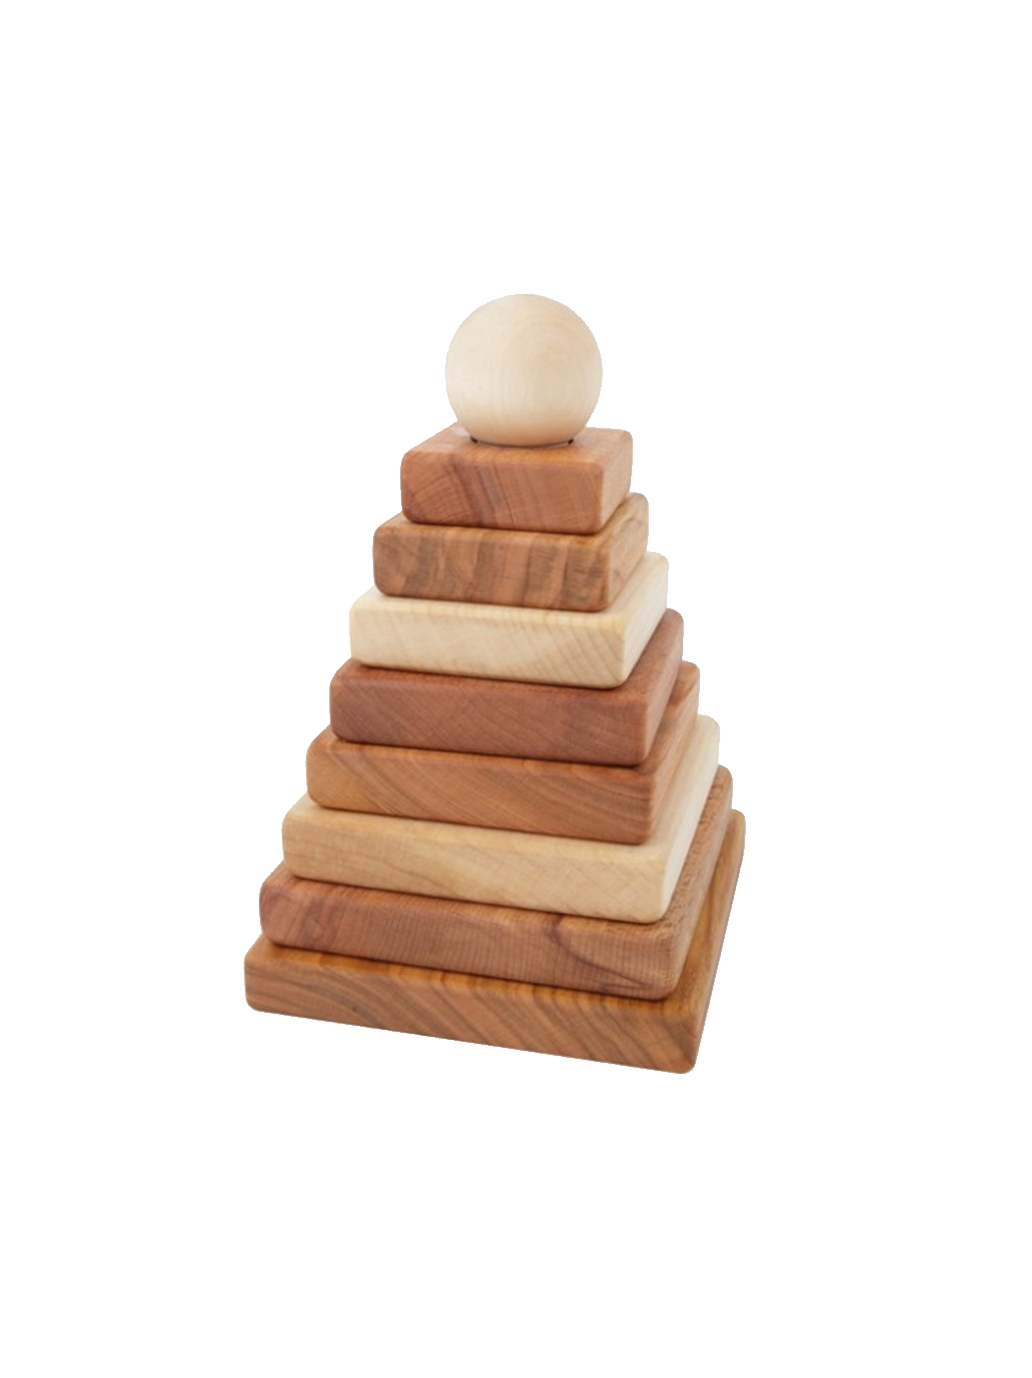 wooden square pyramid